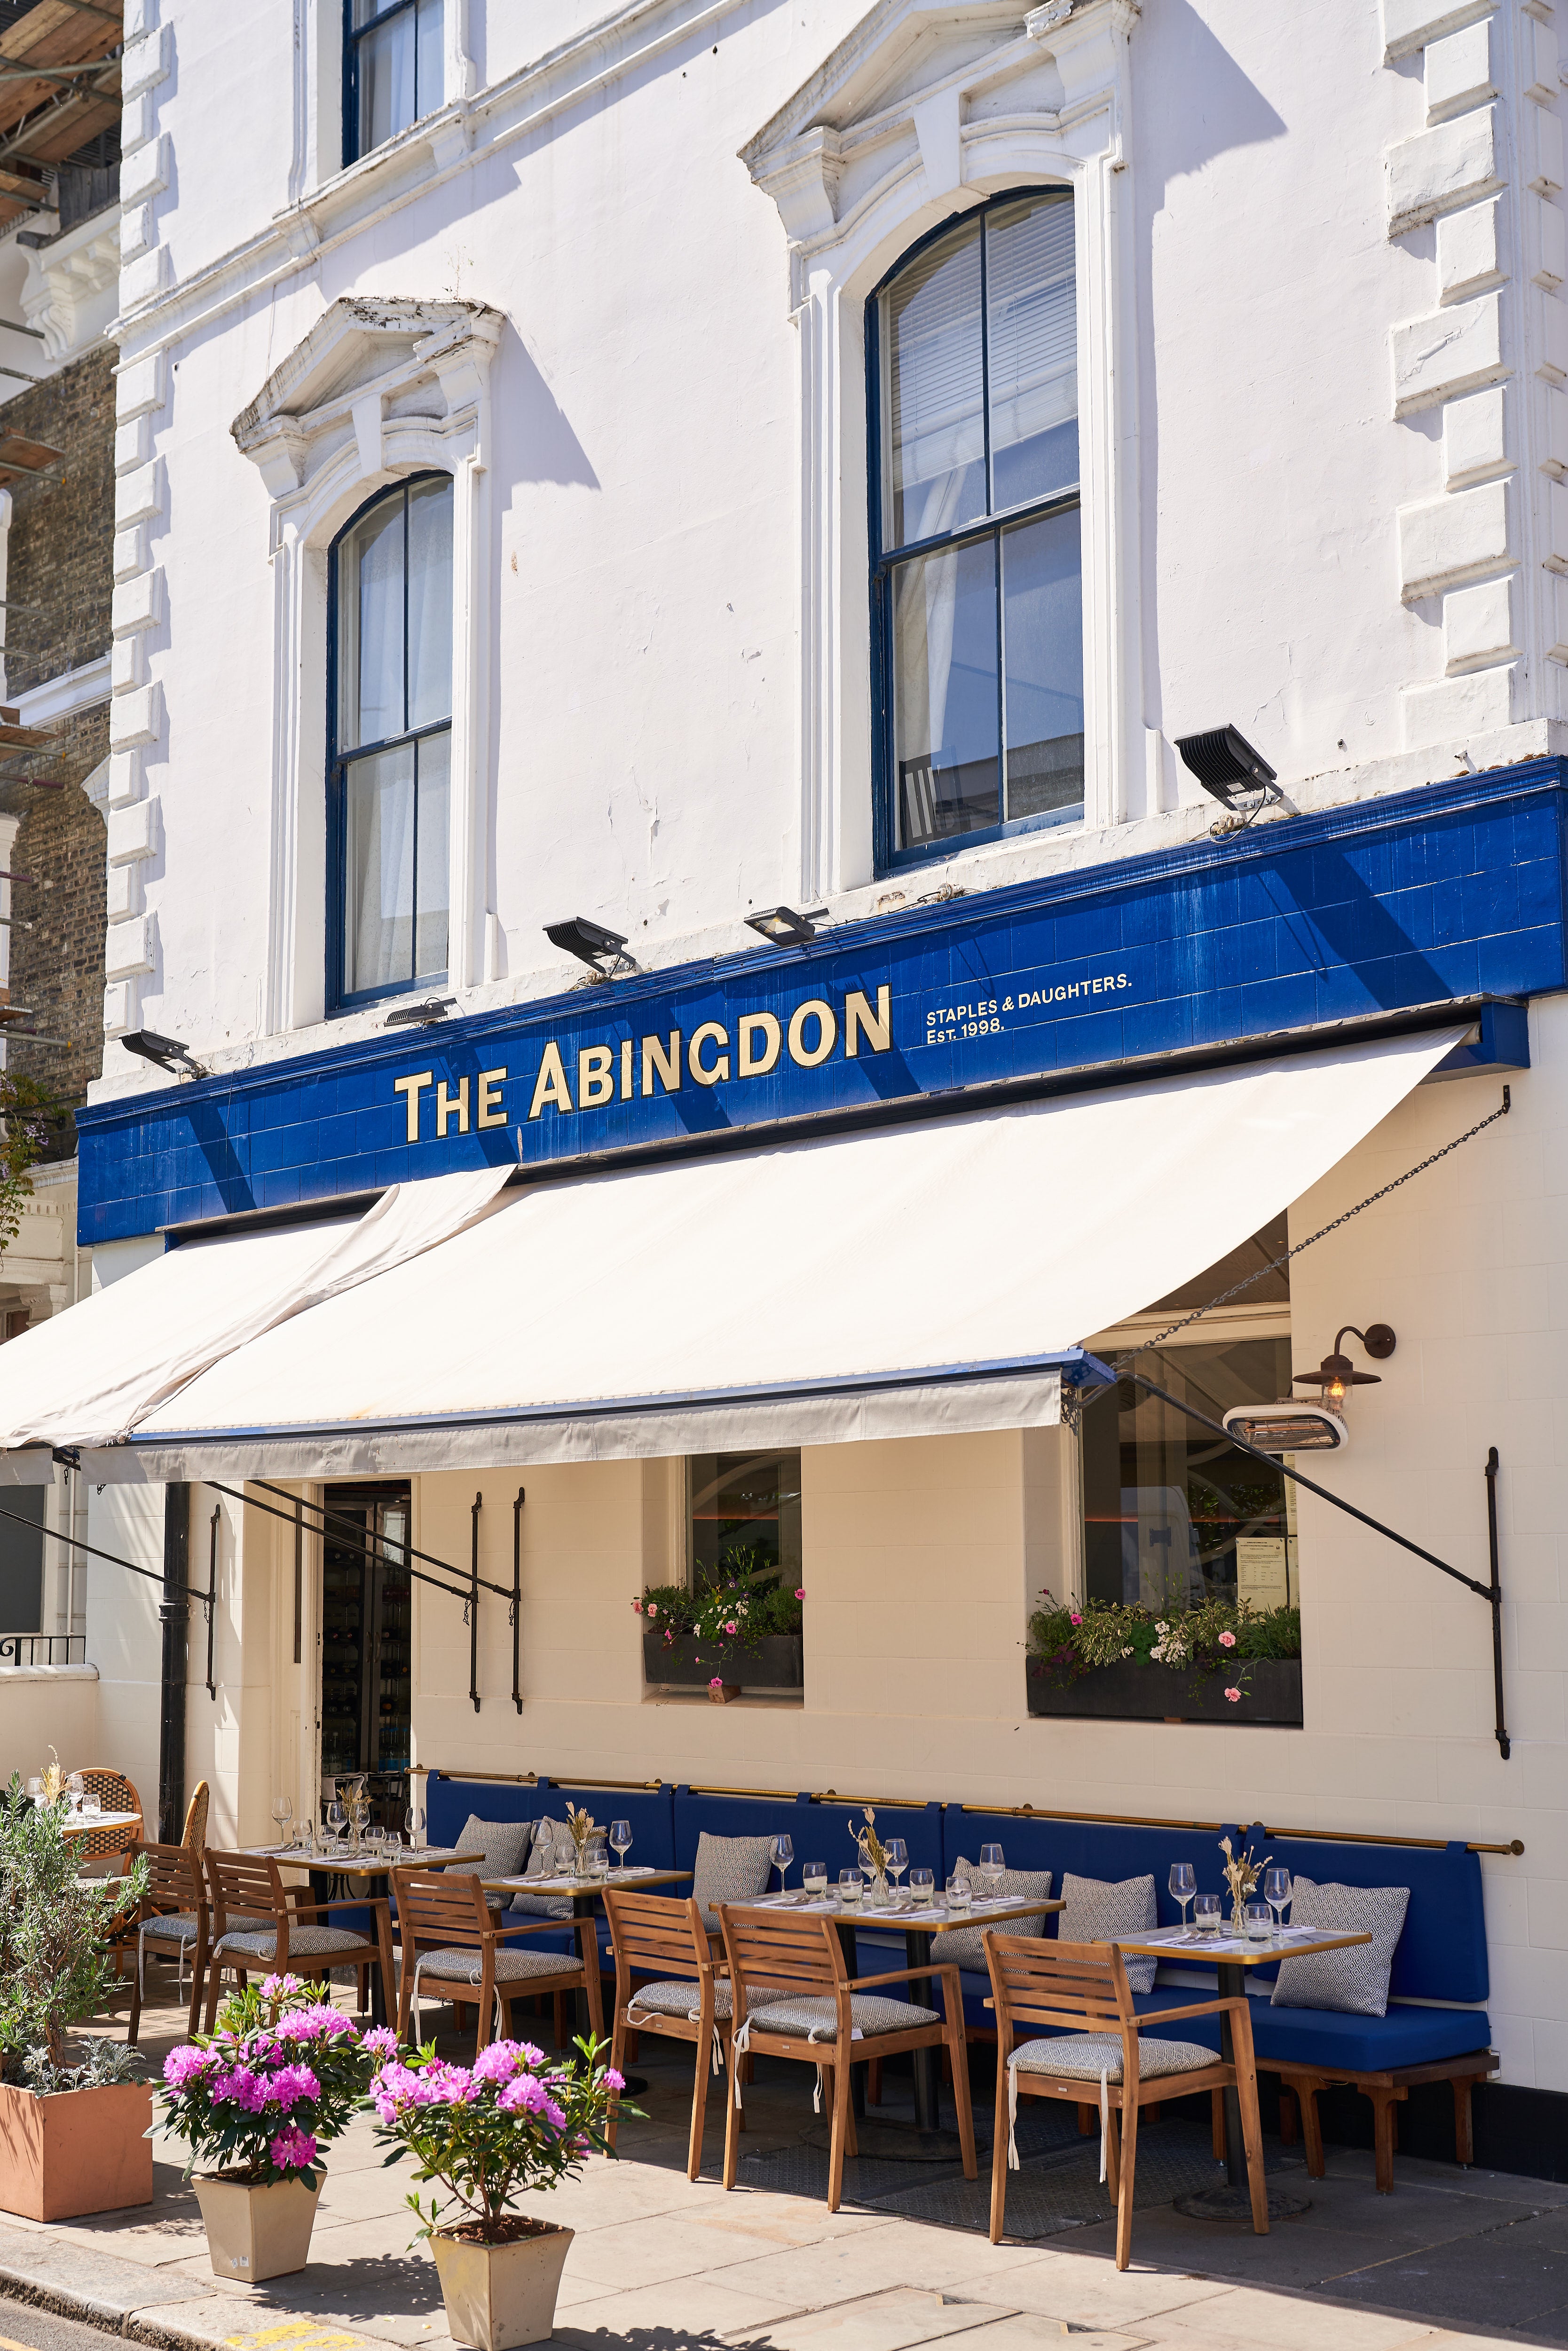 The front of a London restaurant called the Abingdon with a seating area in mid blue fabric